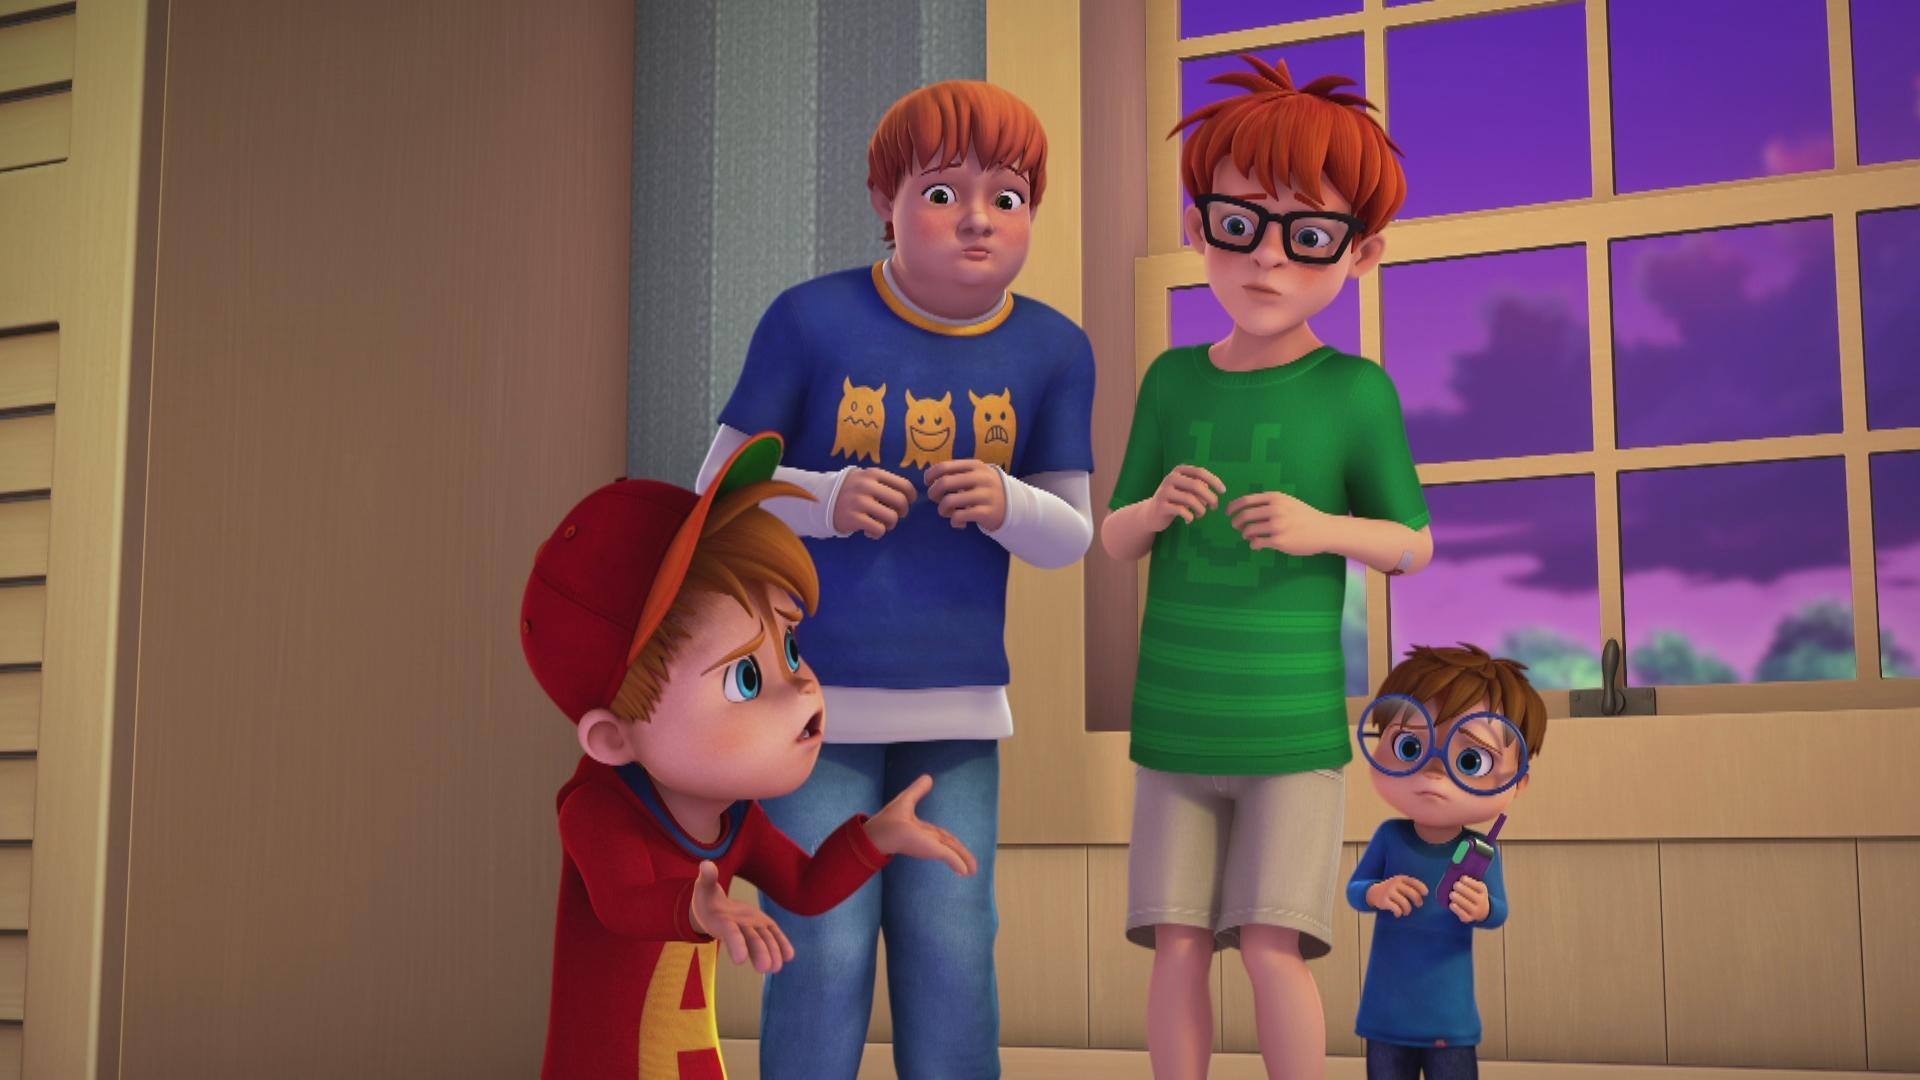 Watch ALVINNN!!! and The Chipmunks Season 2 Episode 16: It's My  Party/Keeping Up with the Humphries - Full show on Paramount Plus